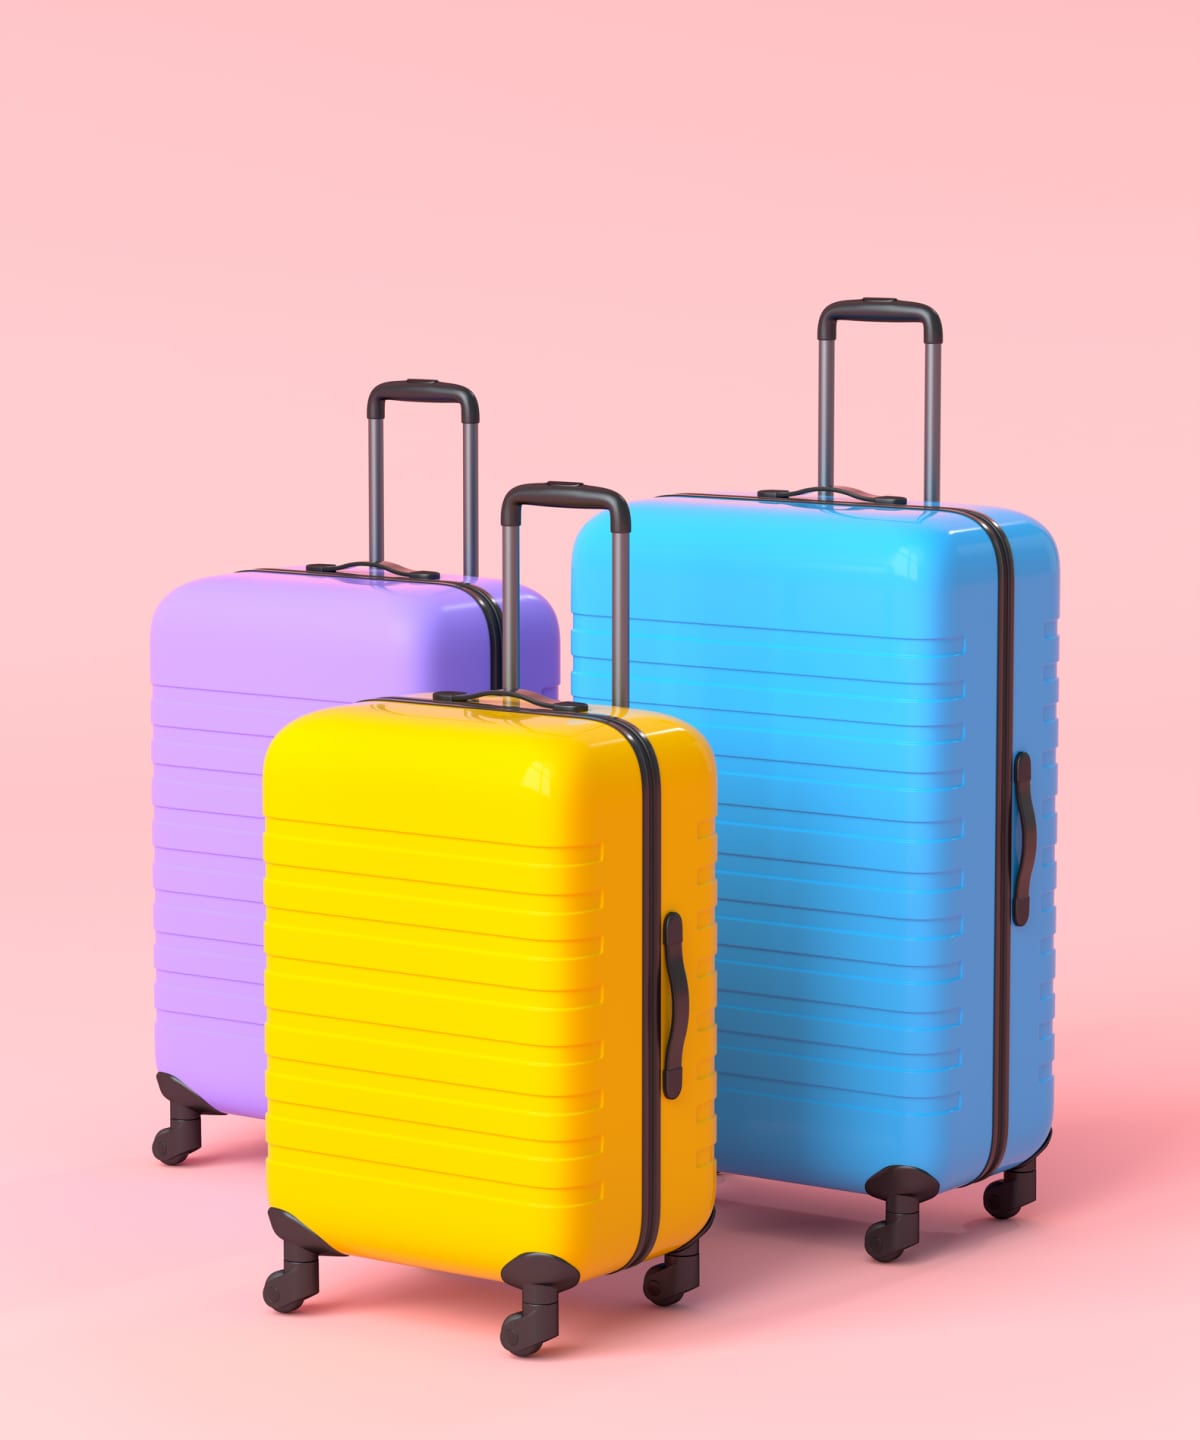 Three colorful hard shell suitcases set upright against a light purple background